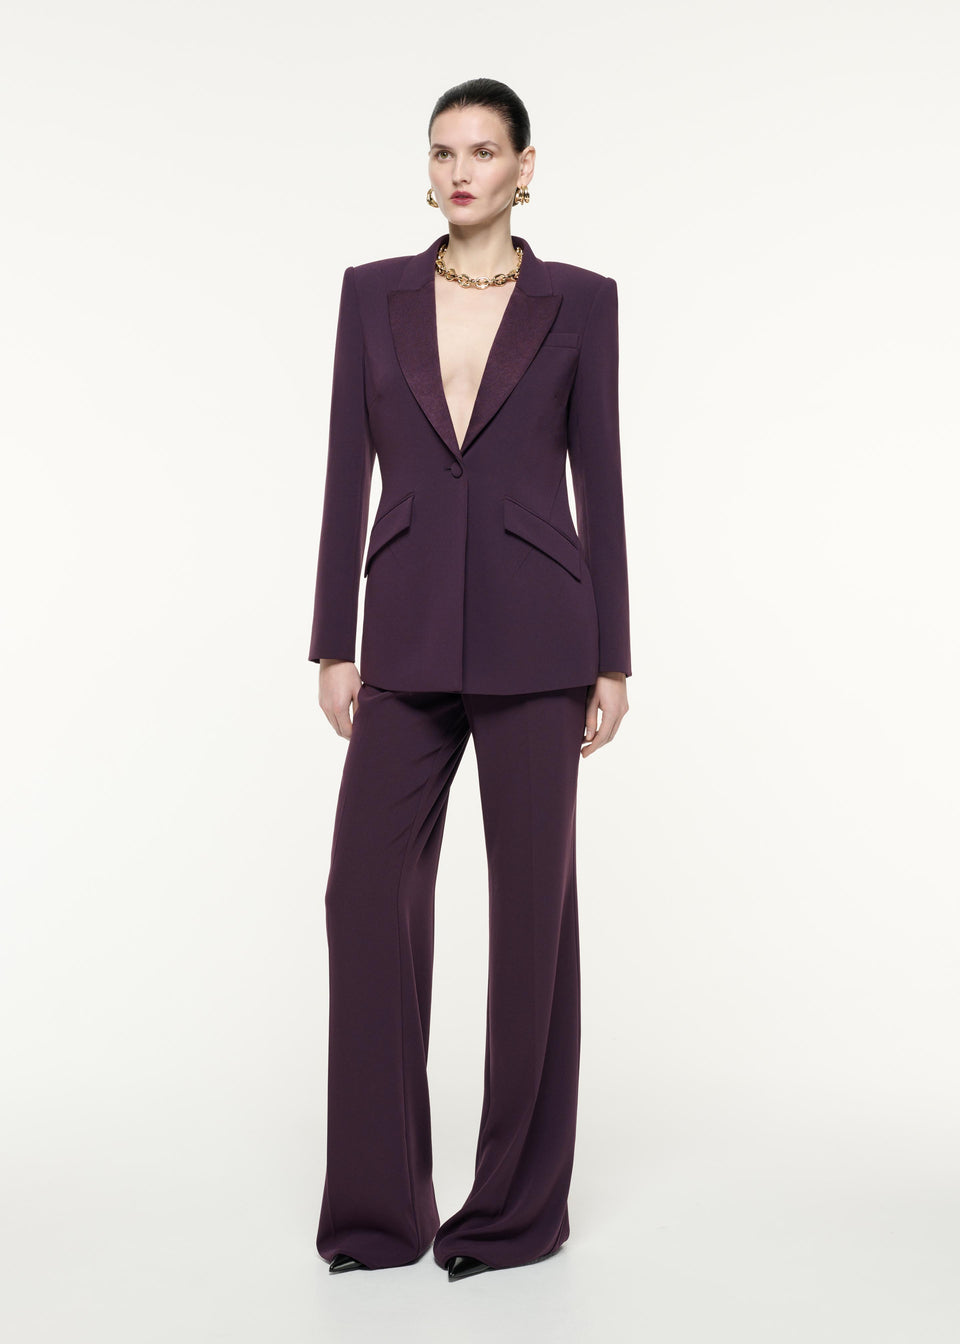 A front view image of a model wearing the Satin Crepe Trouser in Aubergine